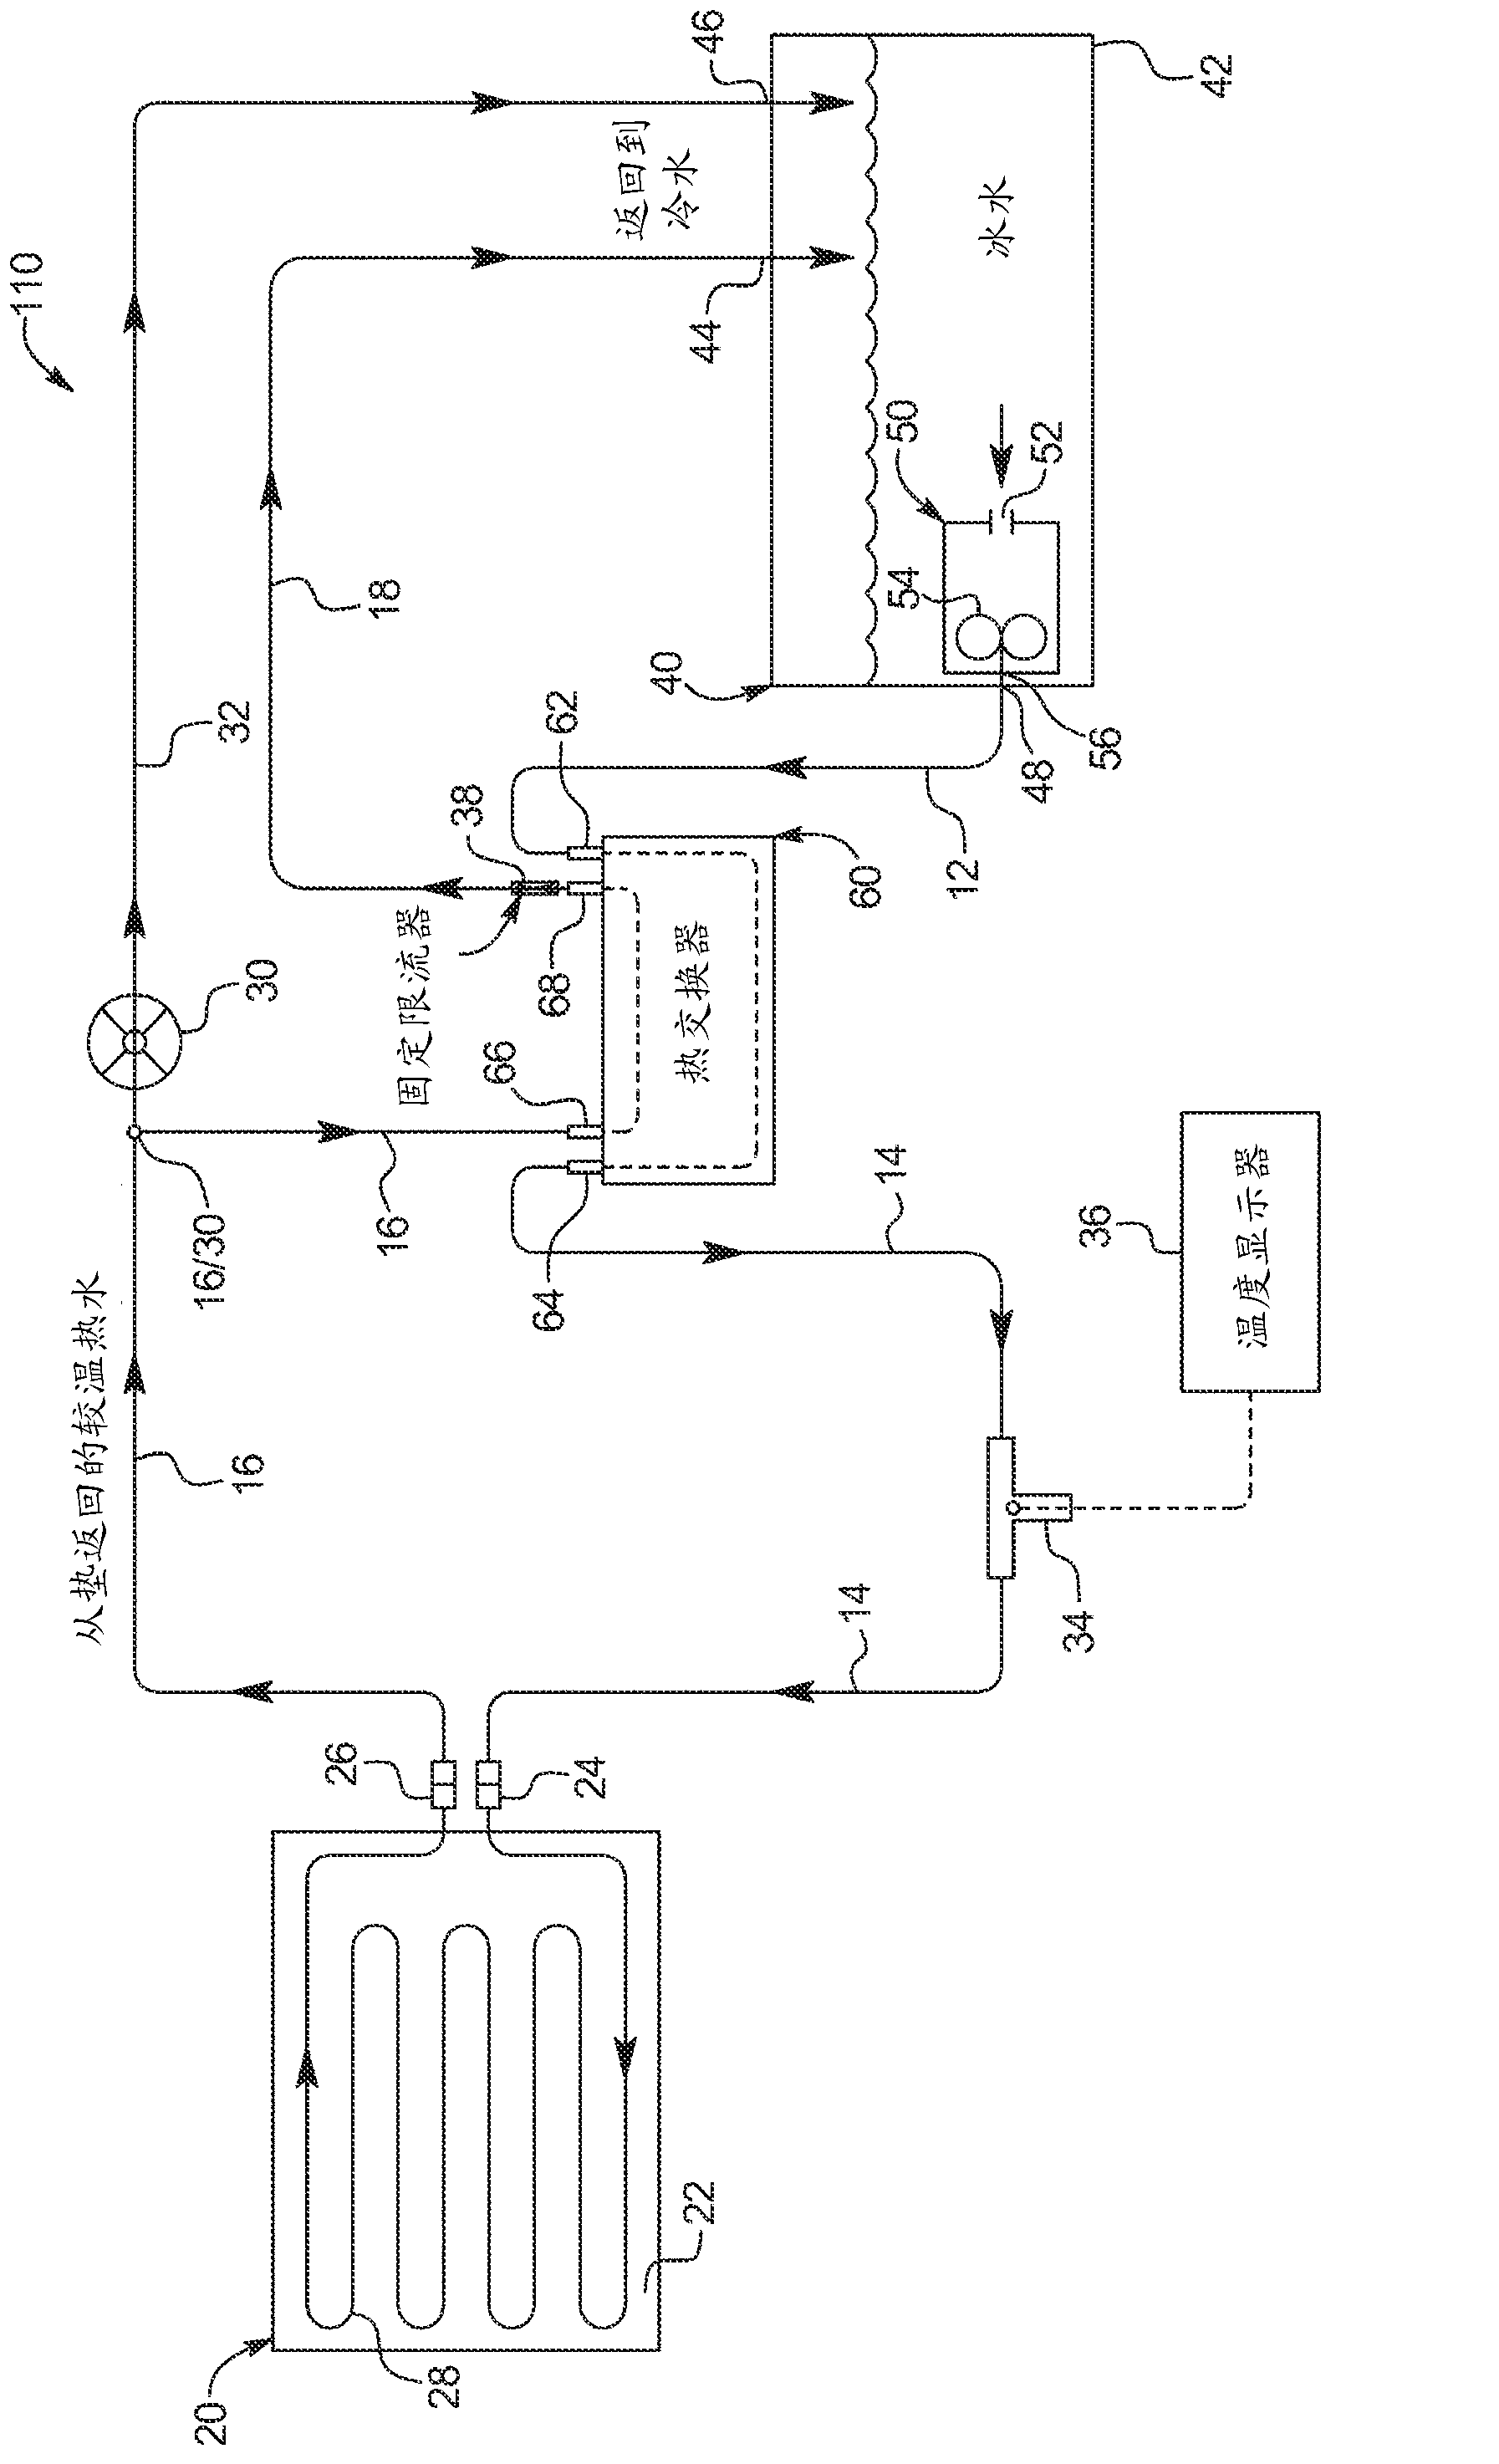 Cold therapy apparatus using heat exchanger